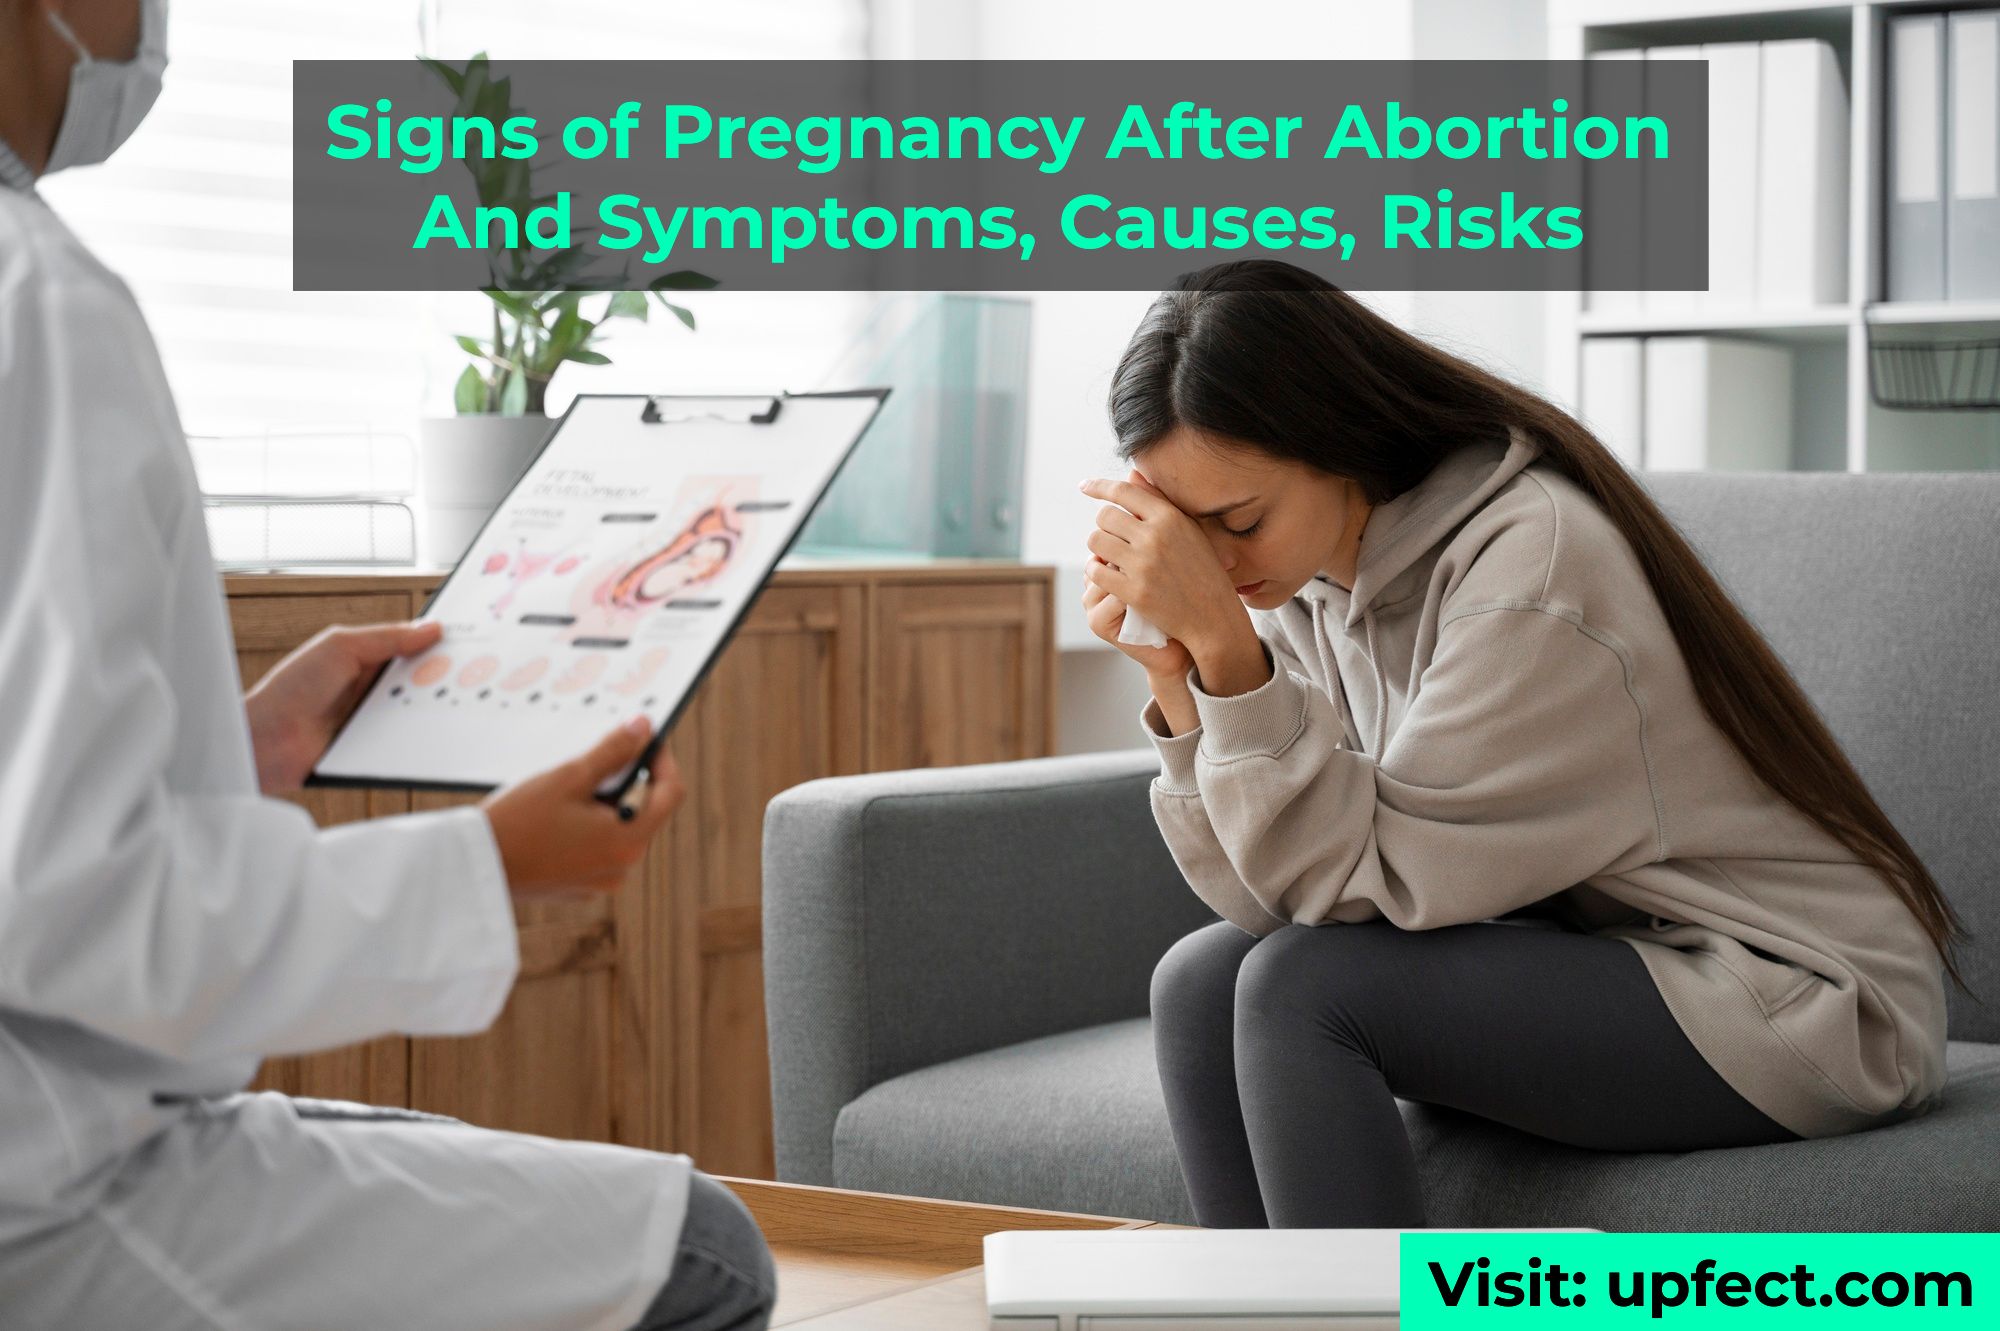 Signs of Pregnancy After Abortion